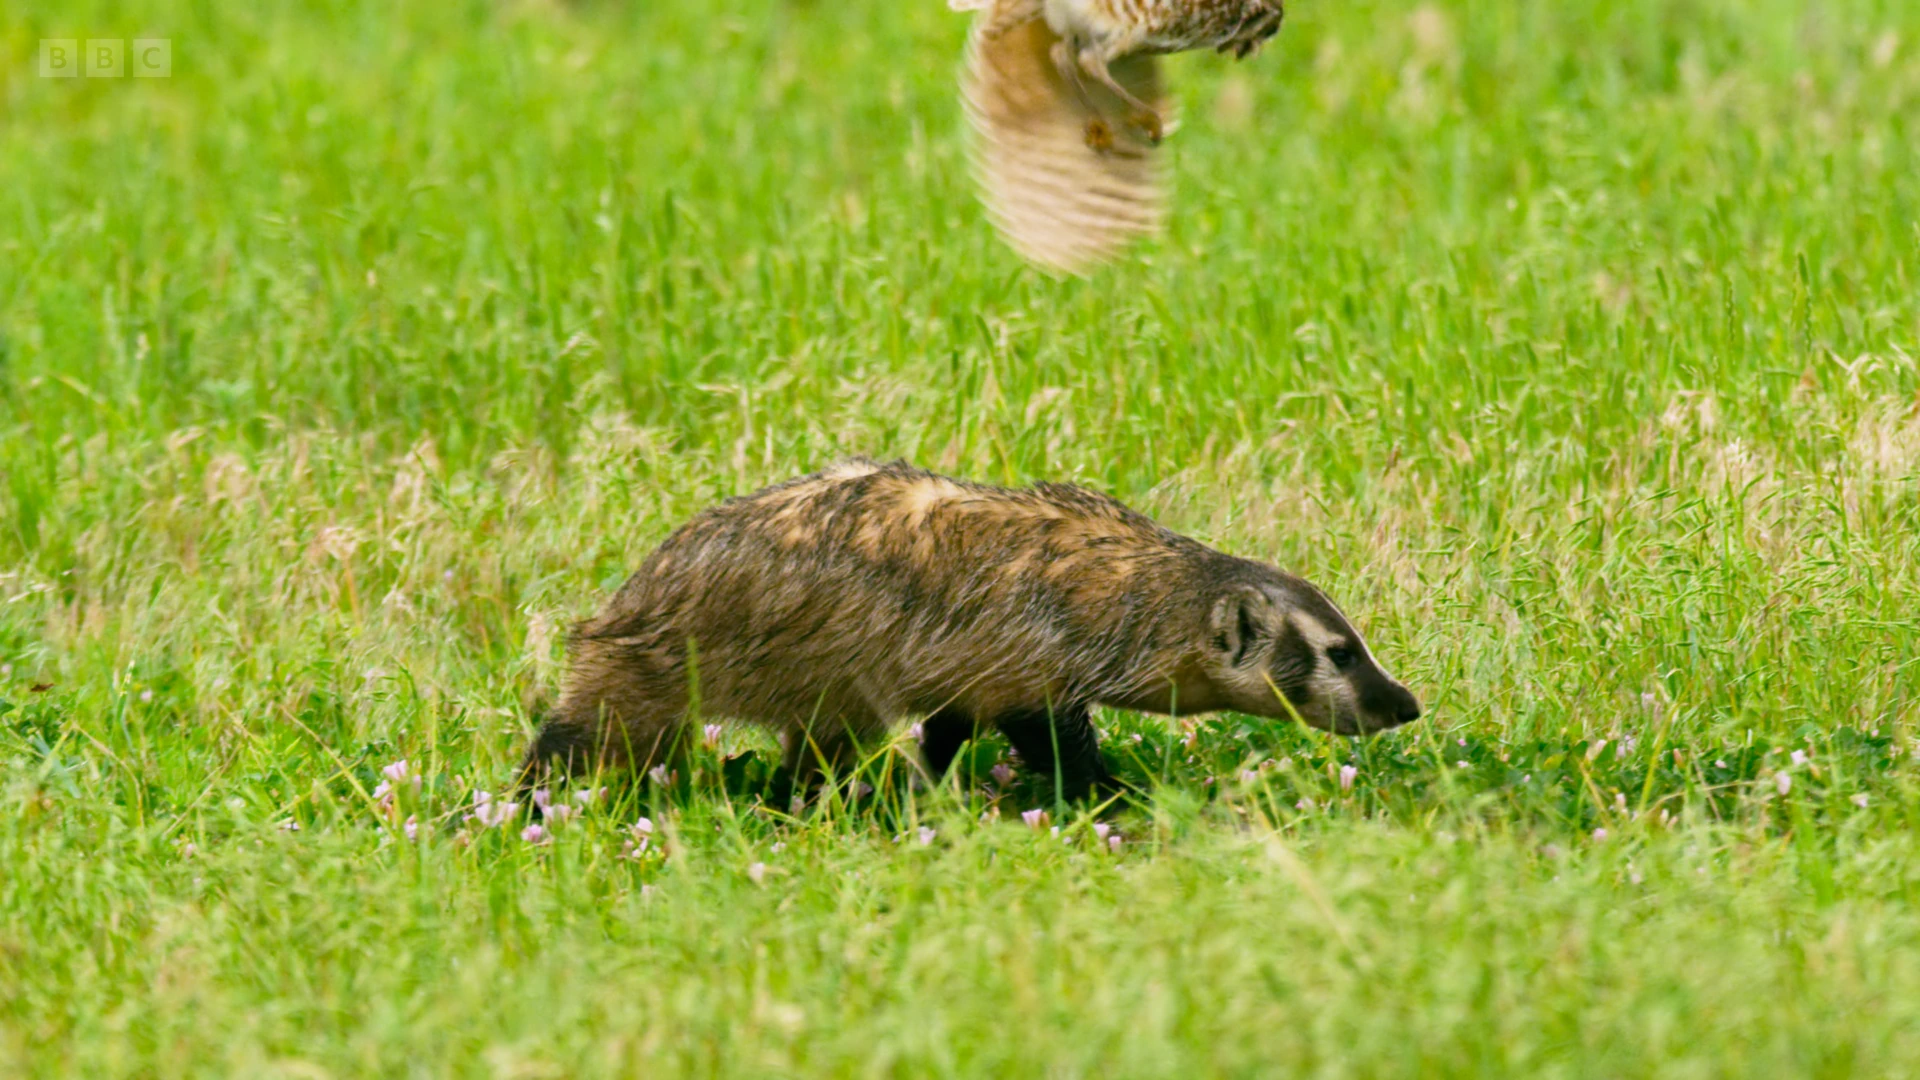 American badger (Taxidea taxus taxus) as shown in Seven Worlds, One Planet - North America